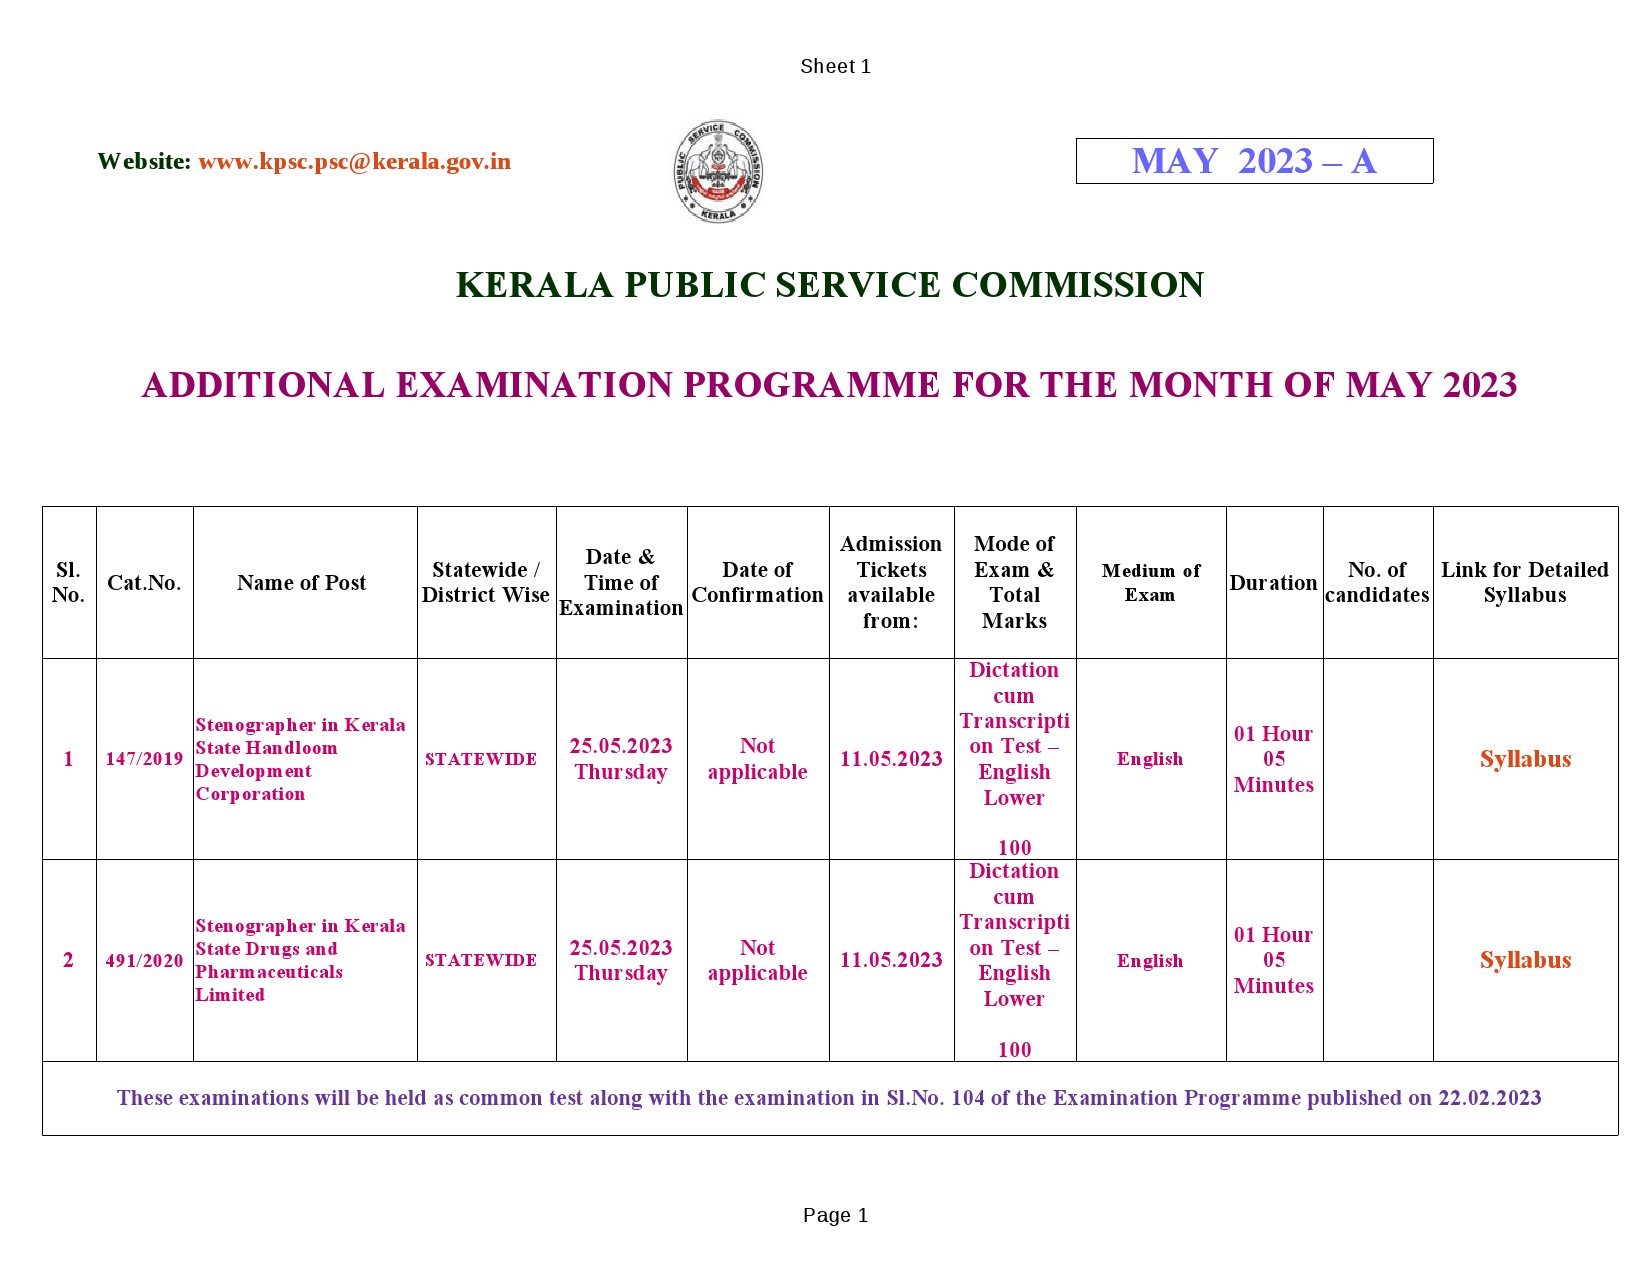 KPSC Additional Examination Programme For The Month Of May 2023 - Notification Image 1